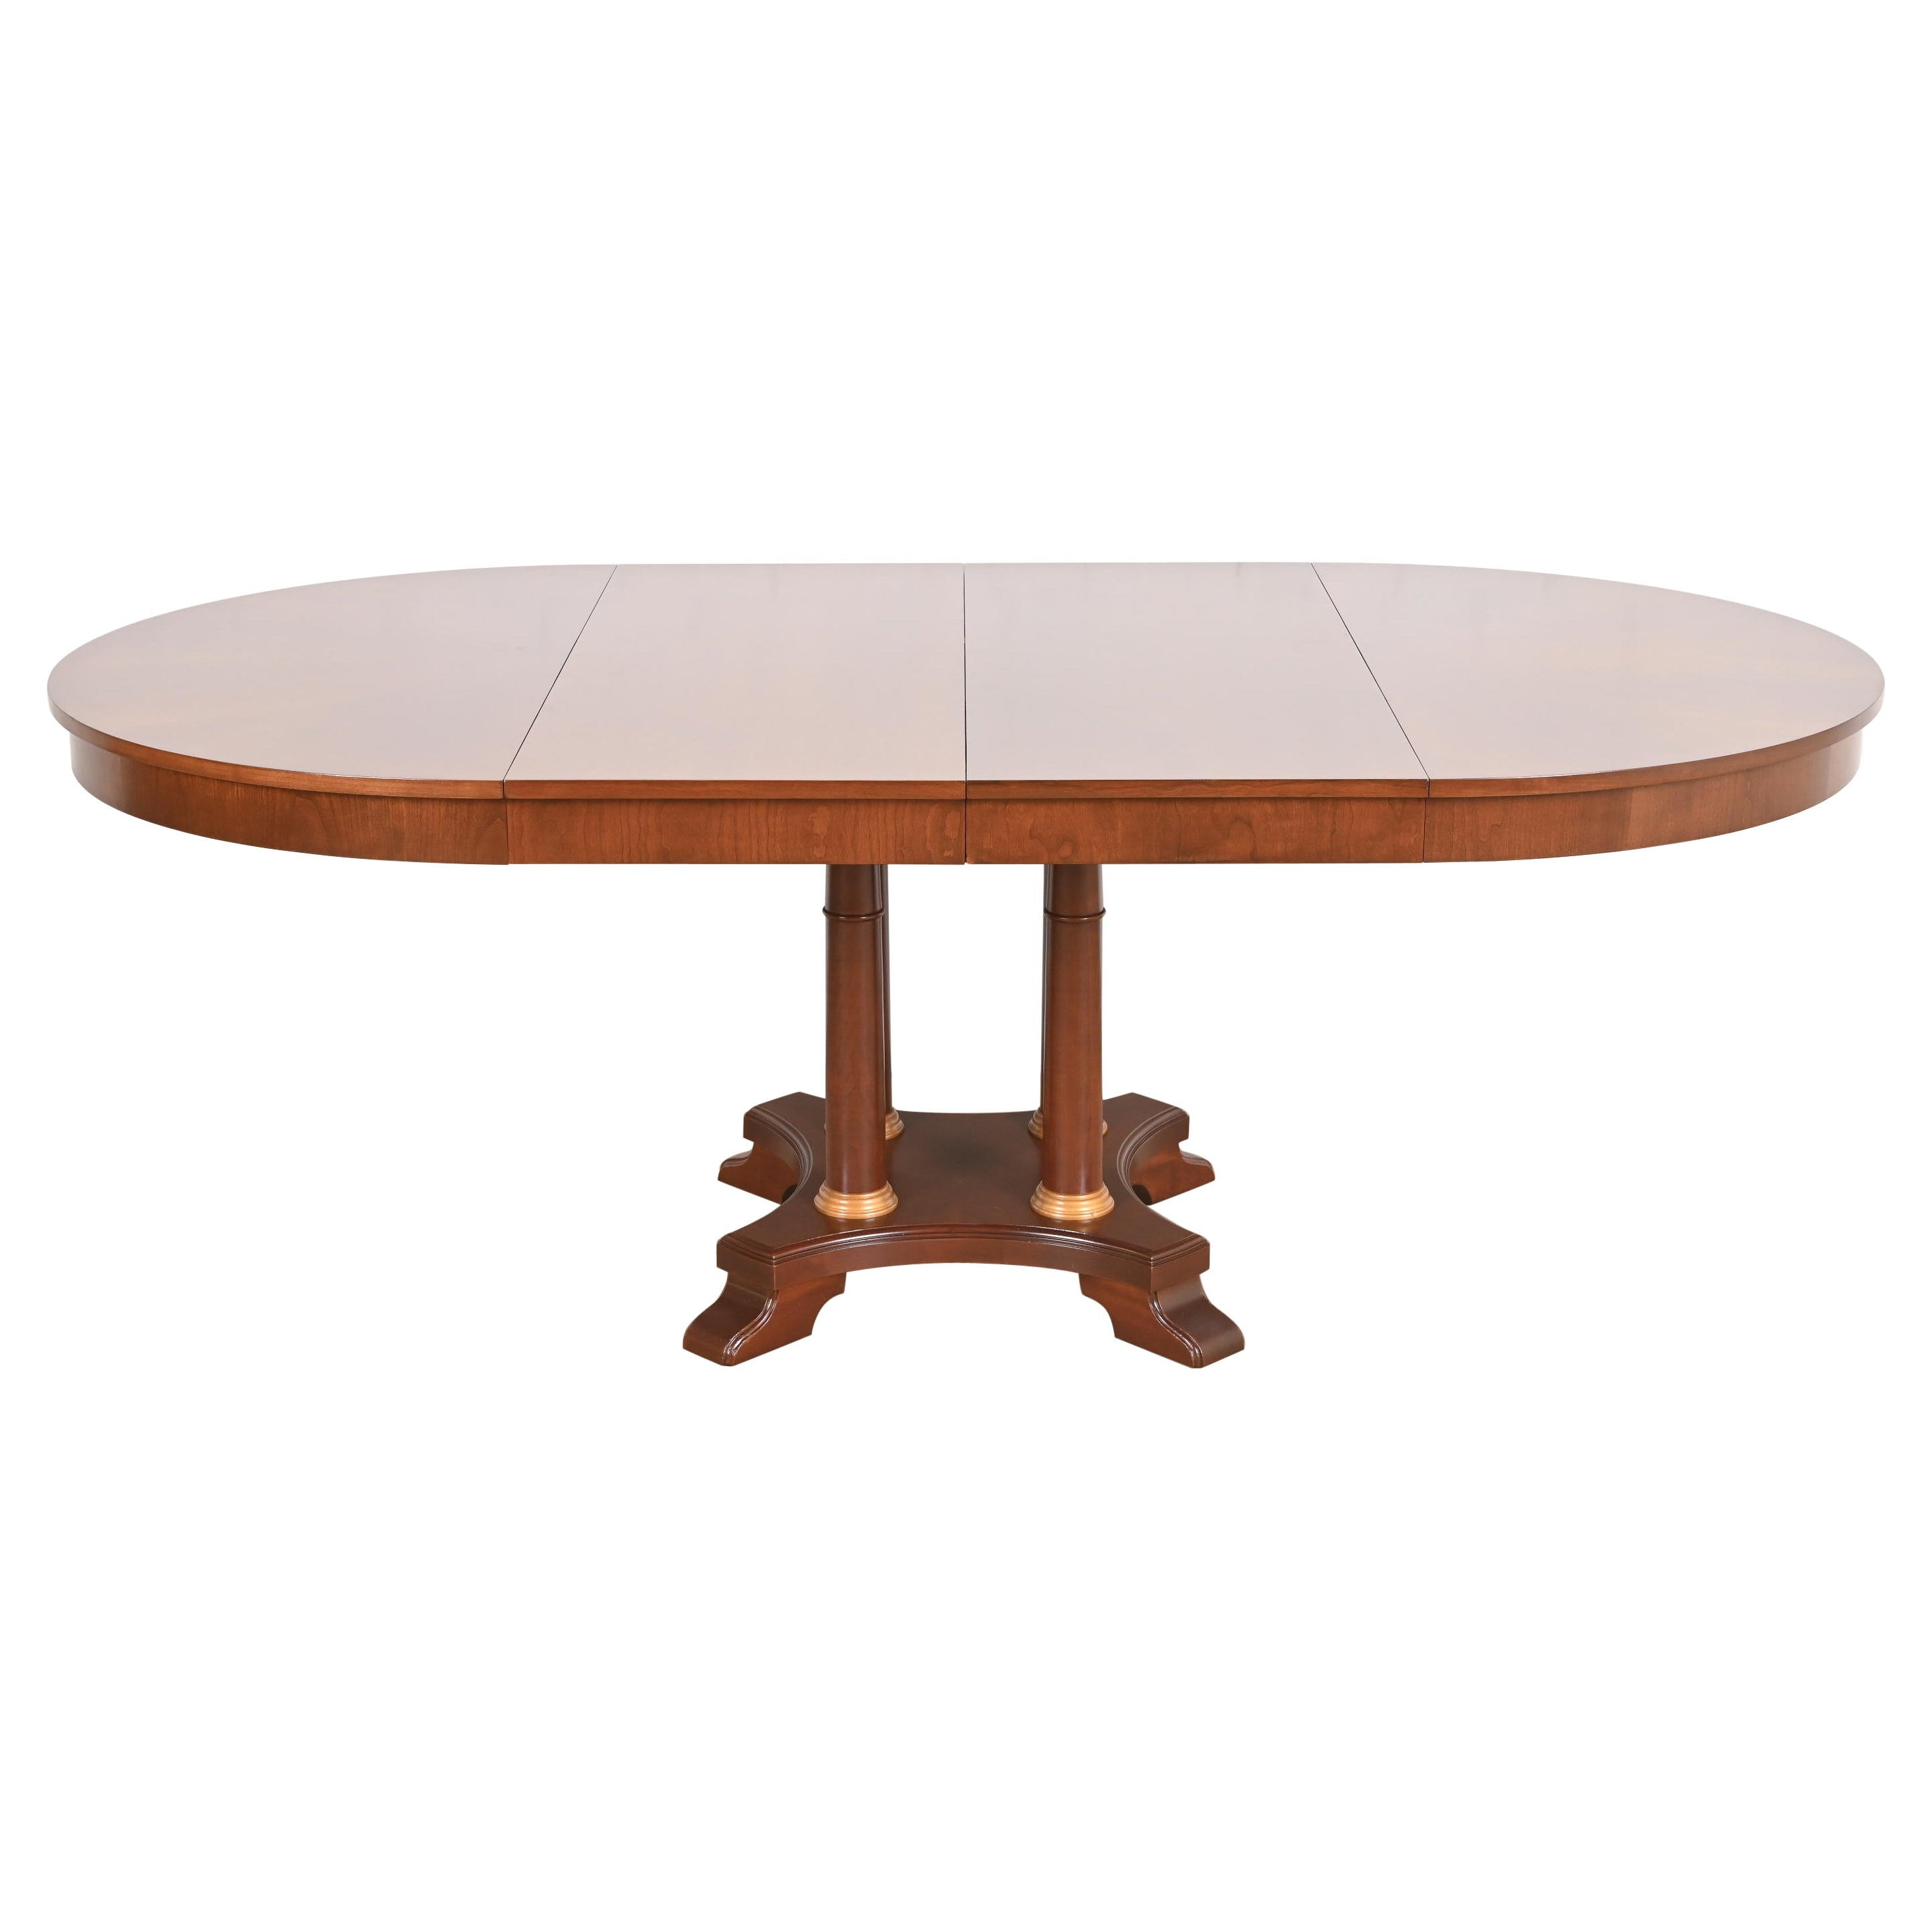 Neoclassical or Empire Cherry Wood Pedestal Dining Table, Newly Refinished For Sale